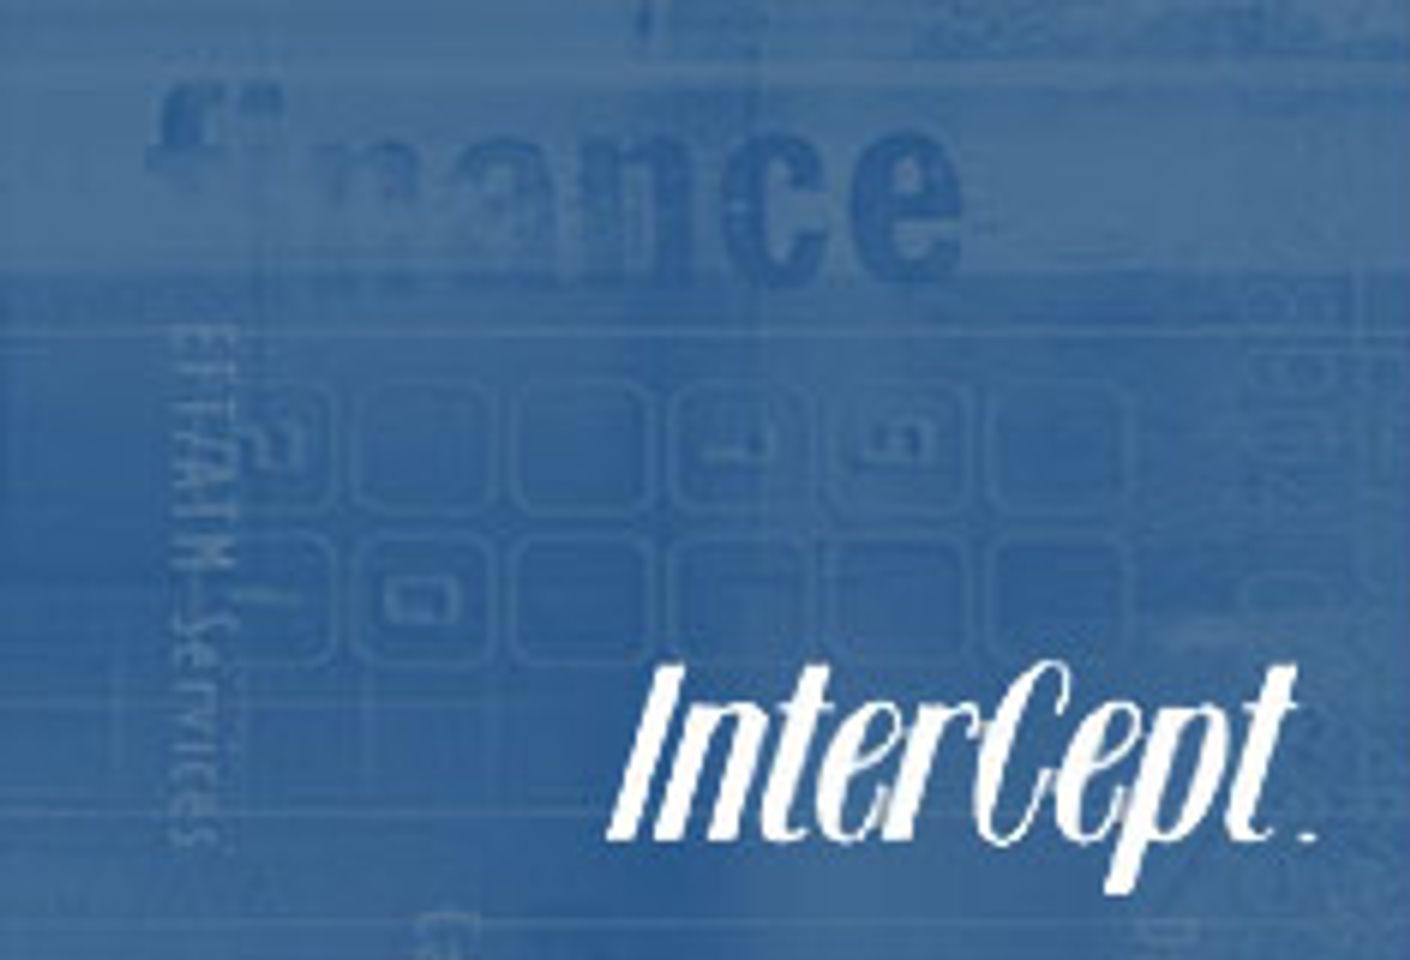 InterCept Selling Payment Solutions Op to CEO, Others